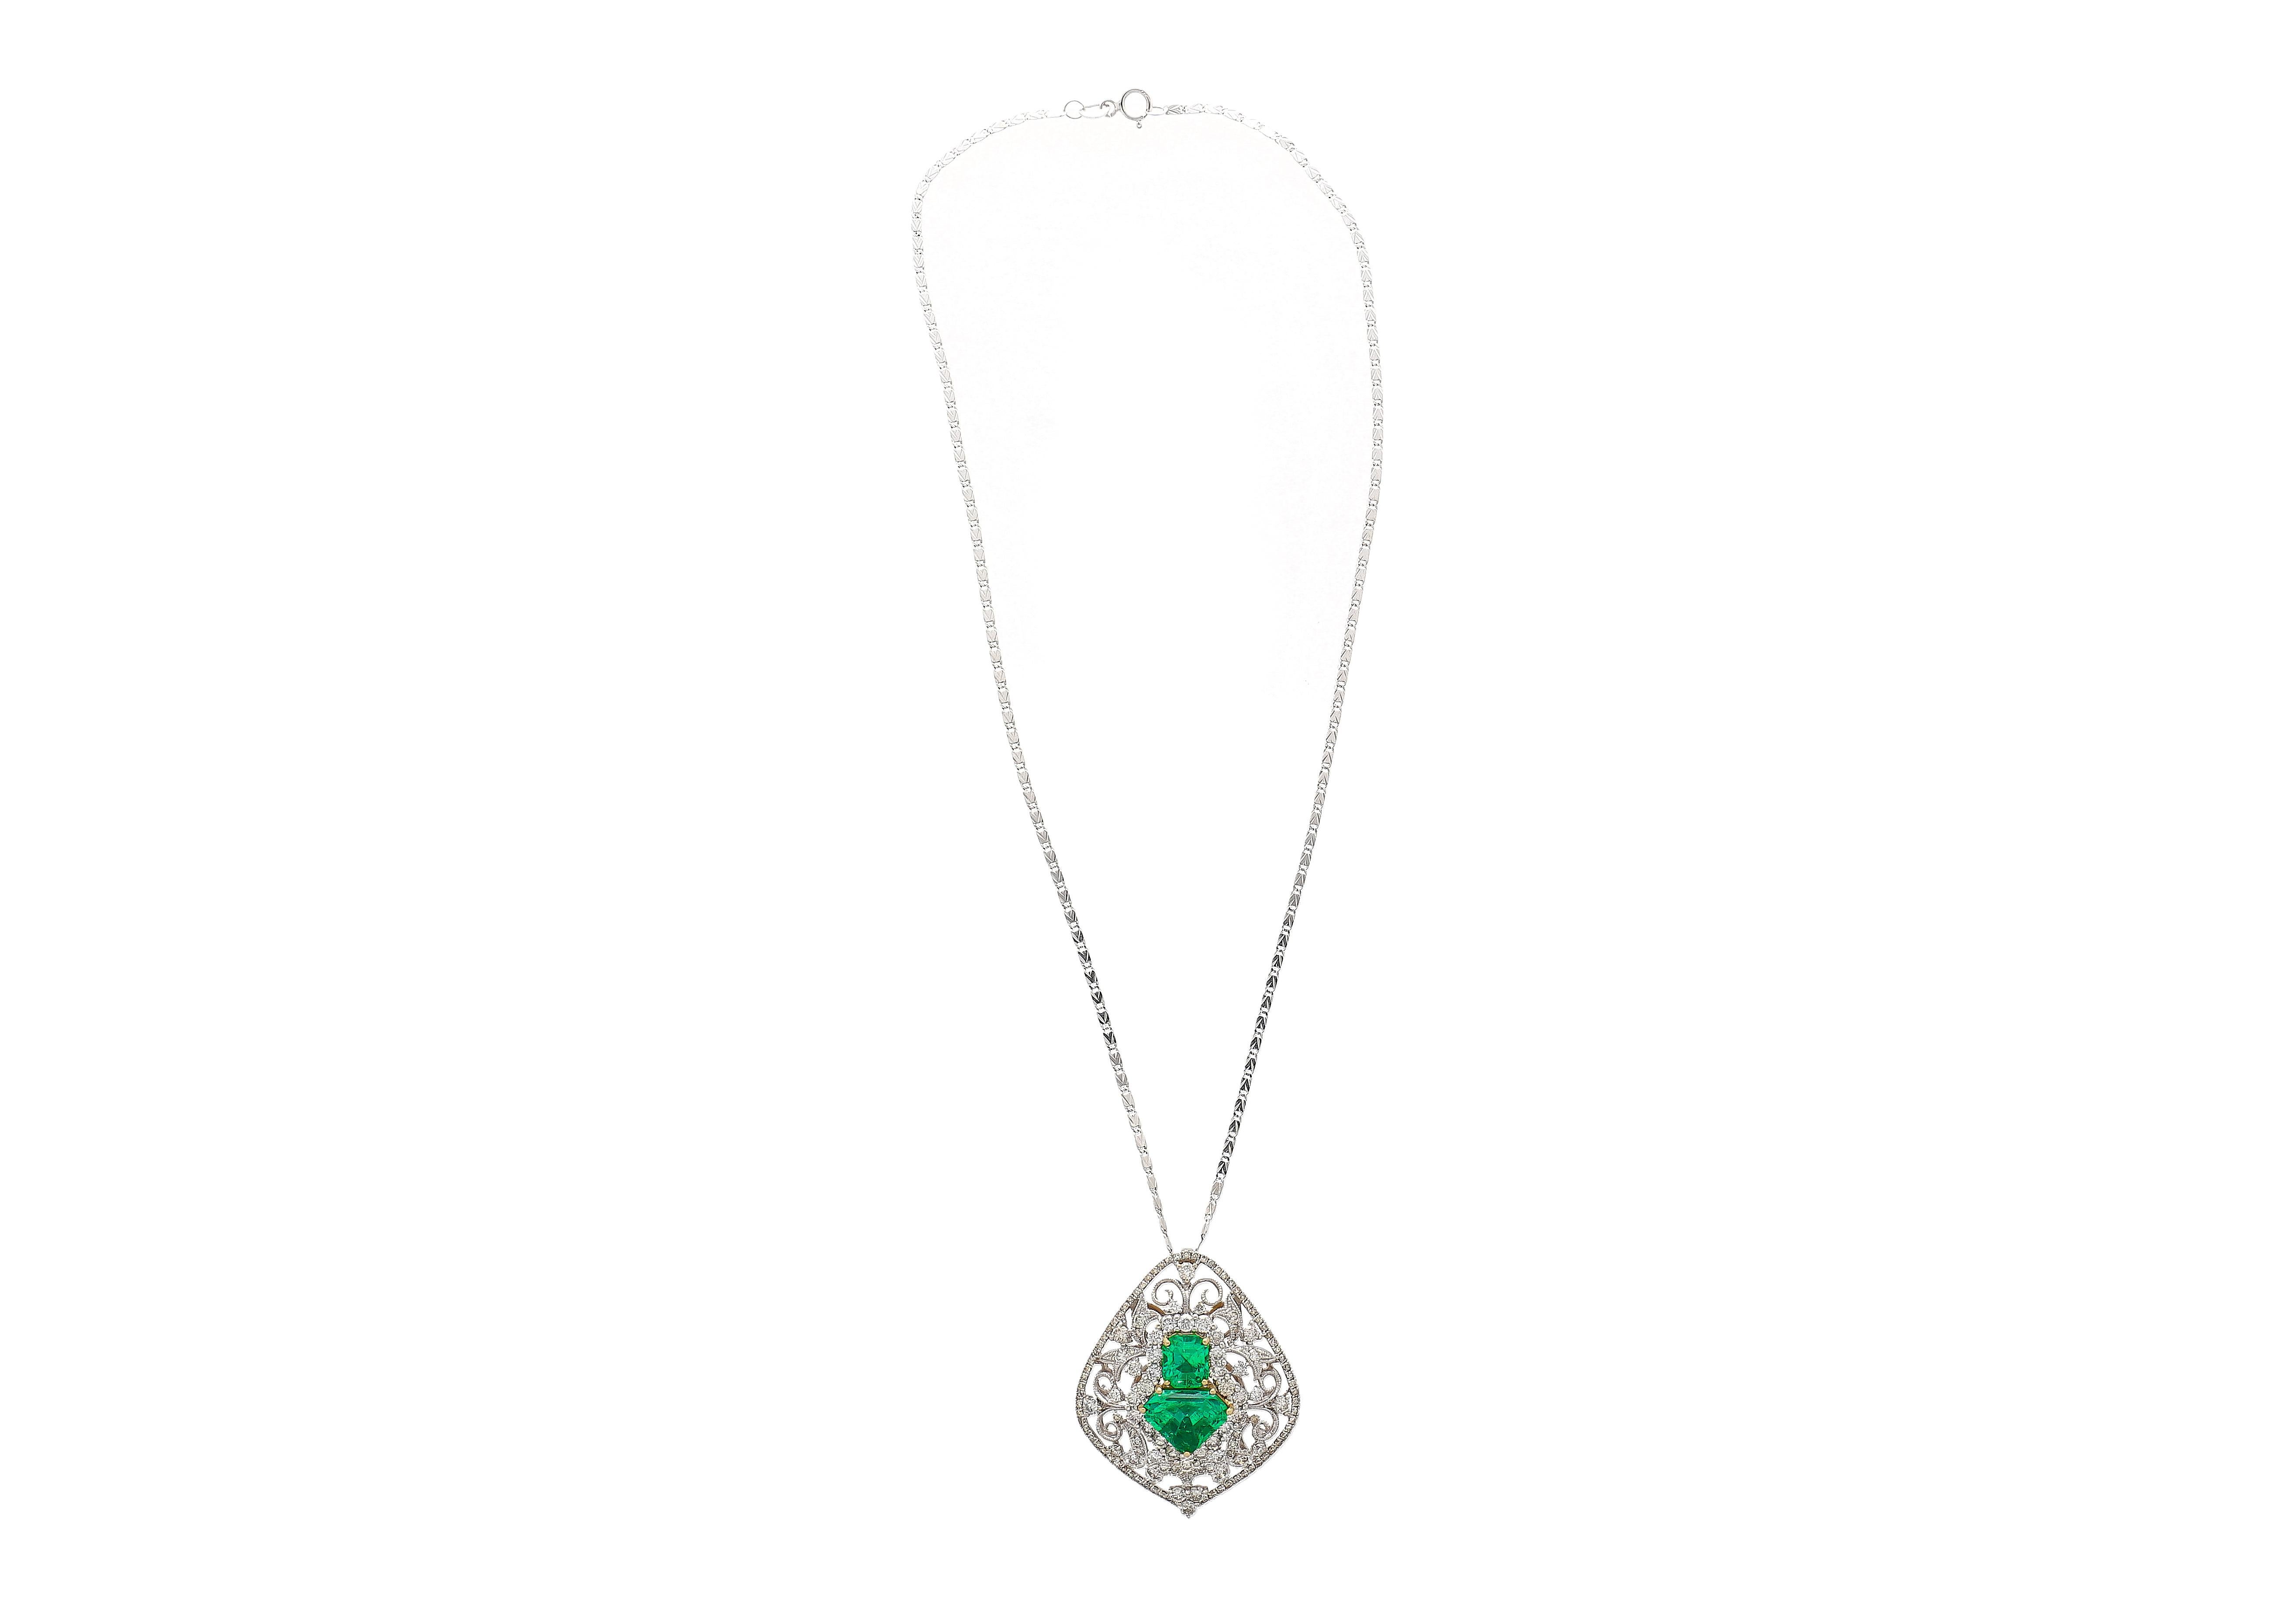 Art Nouveau carved 18k white gold pendant, with two emerald center stones; one shield, and one emerald cut, secured by 18k yellow gold prong setting. With 141 round-cut diamond side stones, this multi-stone pendant necklace is truly a harmonious